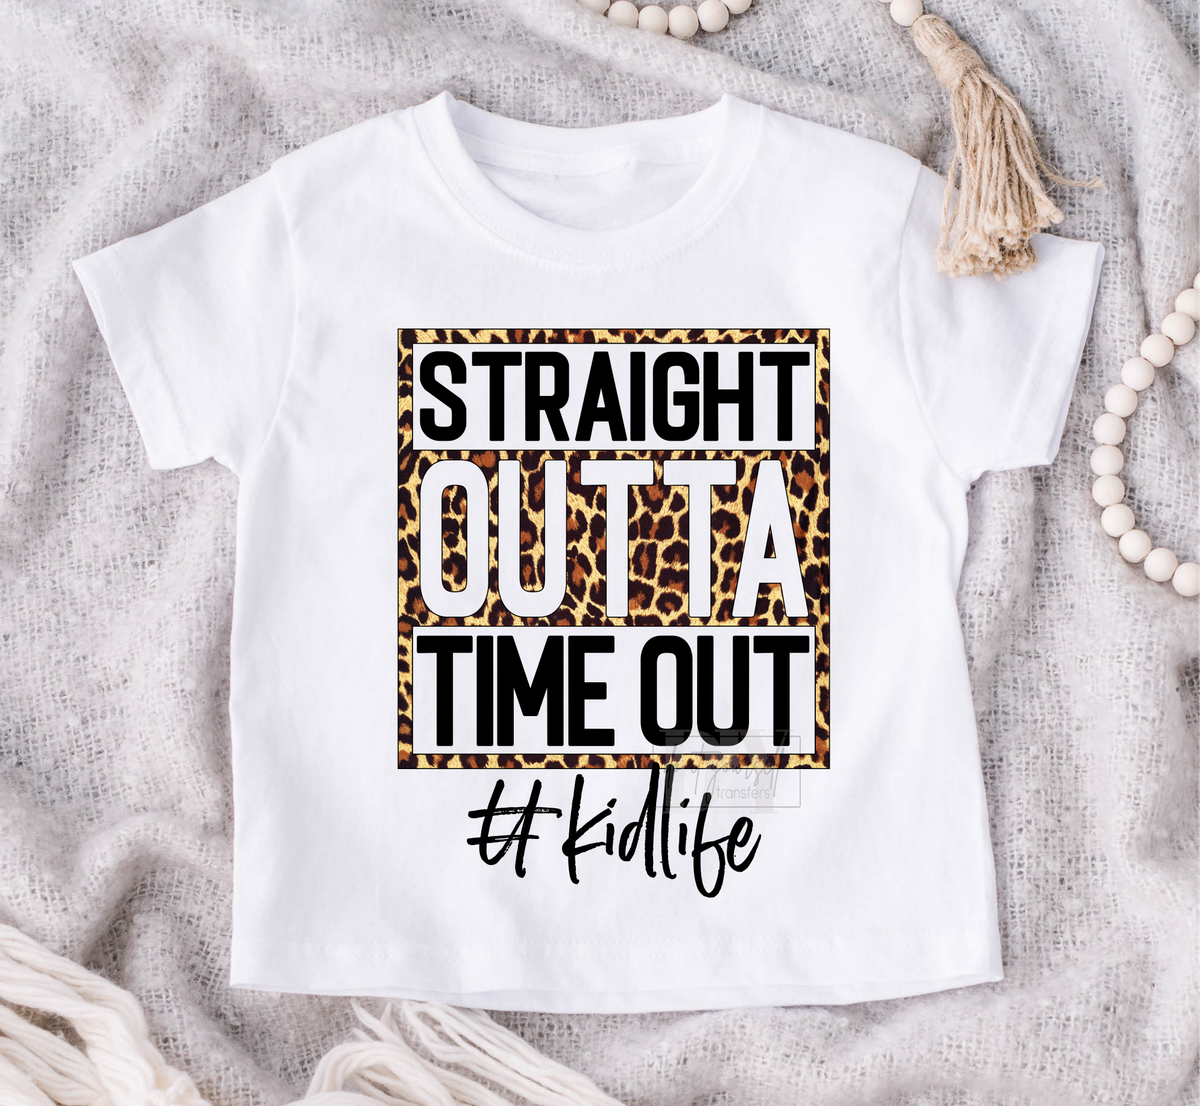 Straight outta time out #kidlife leopard frame  size KIDS 7x9 DTF TRANSFERPRINT TO ORDER